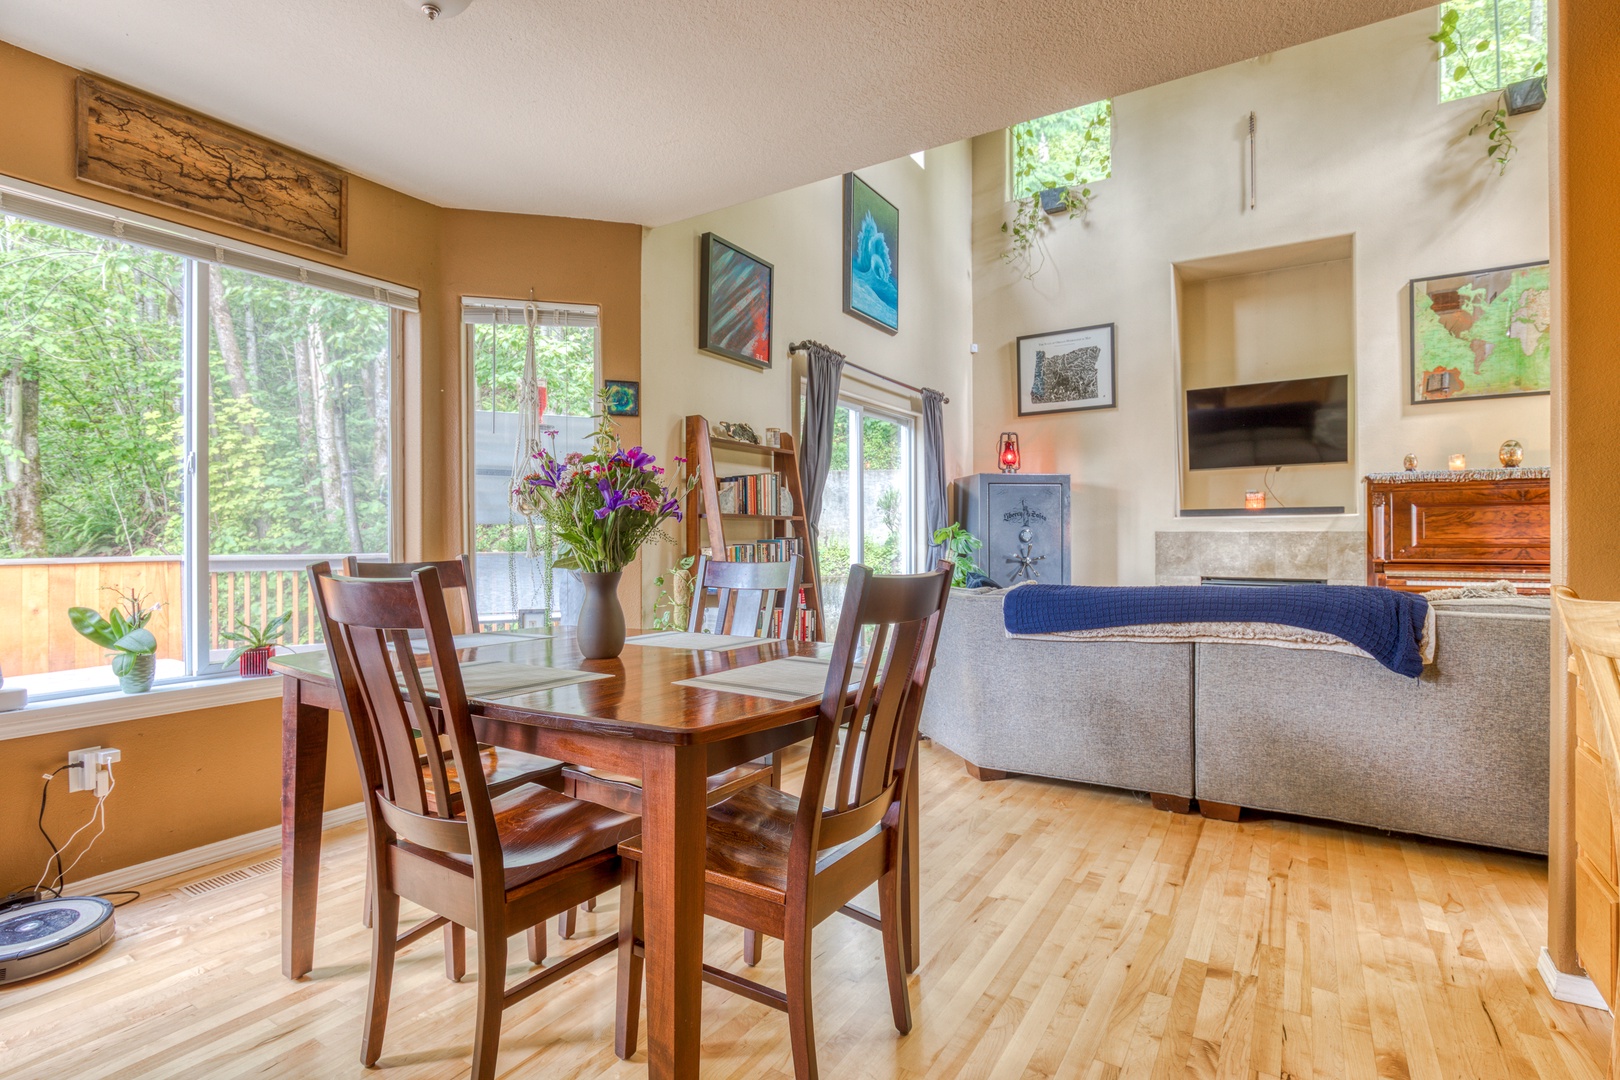 Clackamas Vacation Rentals, Duck Crossing - Just behind the living area, you'll find the dining table